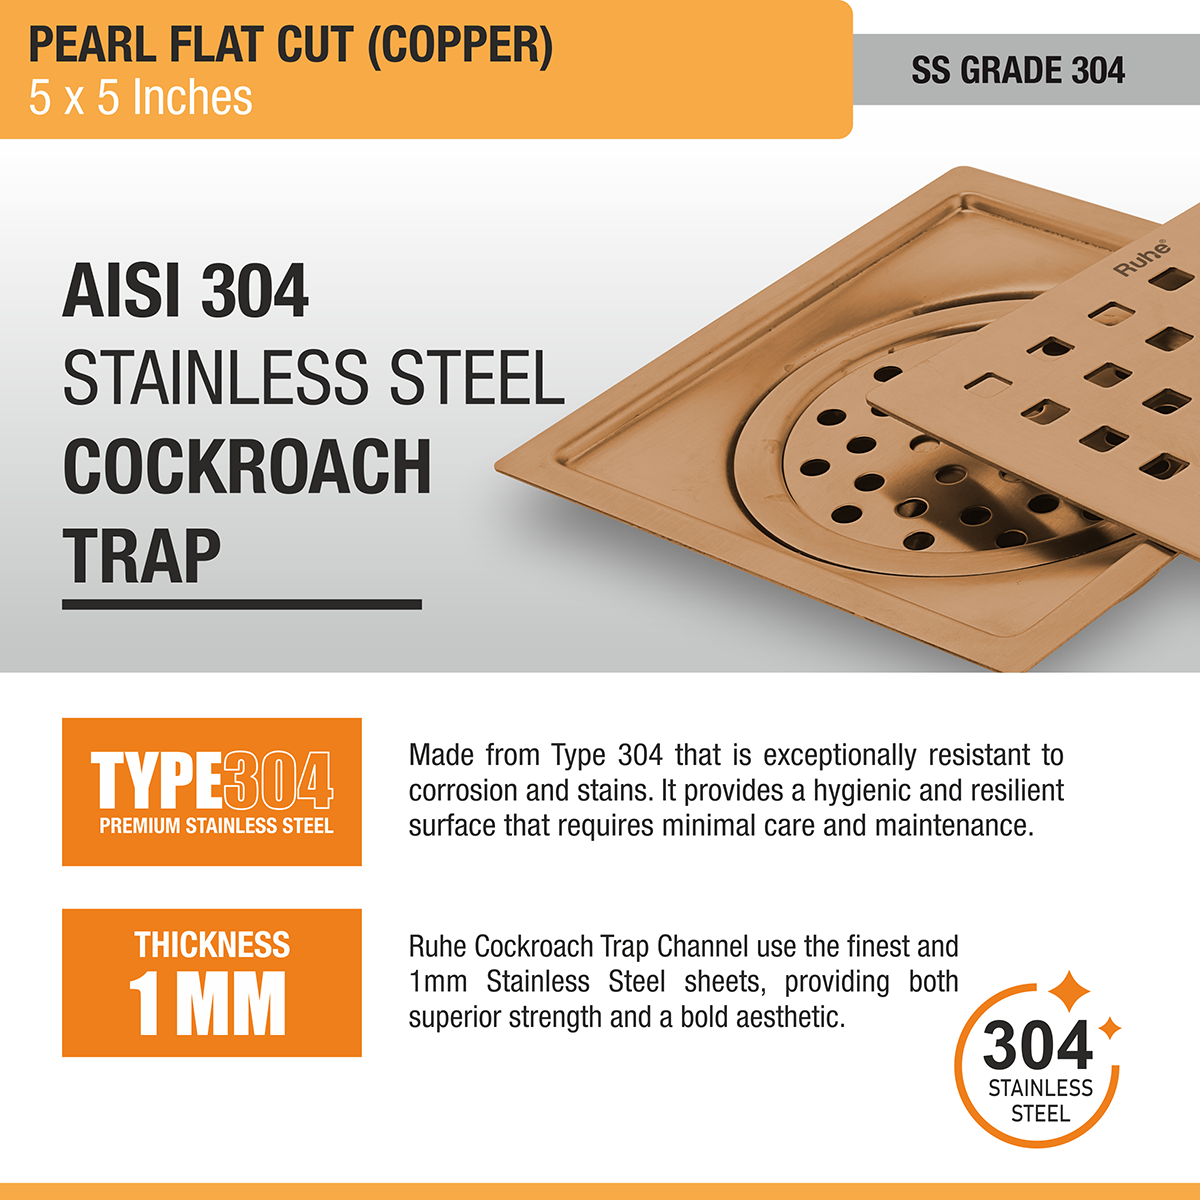 Pearl Square Flat Cut Floor Drain in Antique Copper PVD Coating (5 x 5 Inches) stainless steel